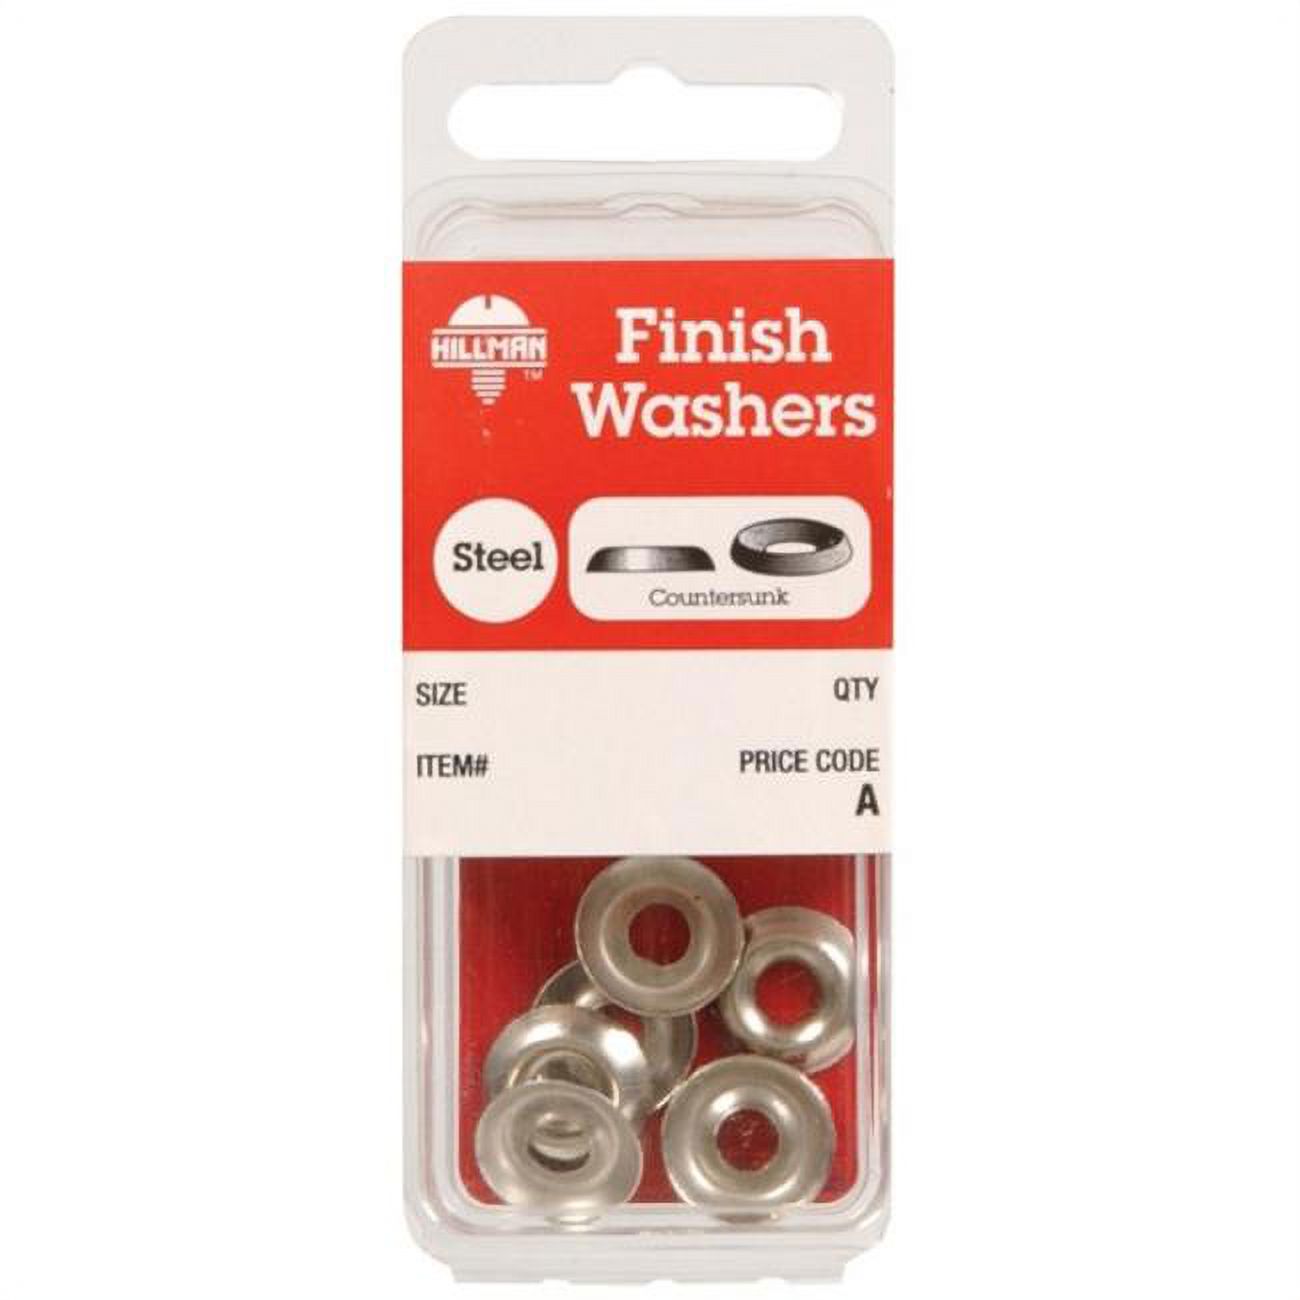 Hillman Nickel-Plated Steel .190 in. Finish Washer 10 pk - image 1 of 2